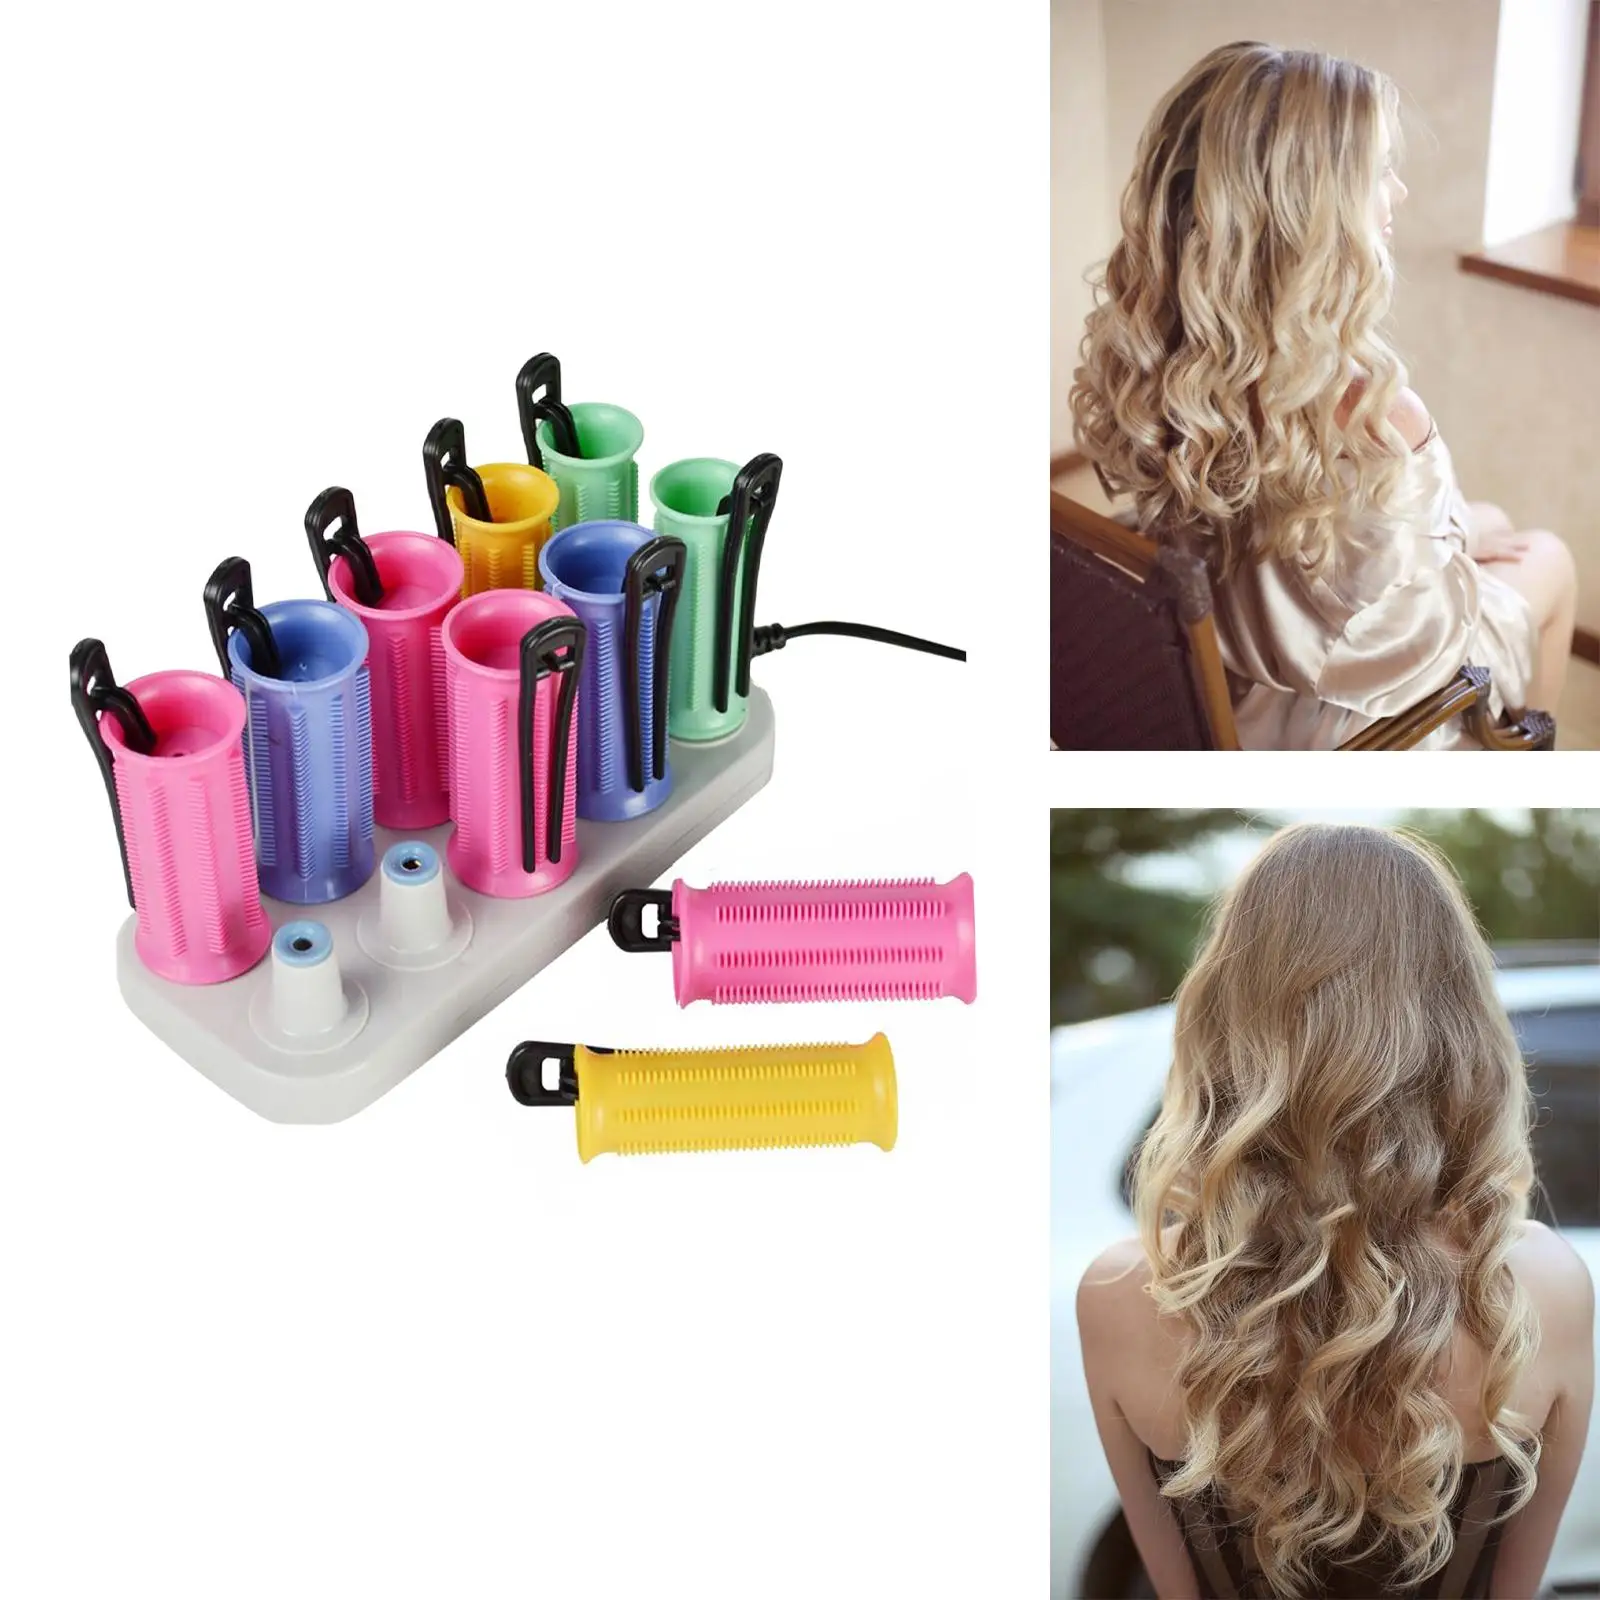 Professional 10Pcs Electric Heated Hair Rollers Curlers Curling Roll for Short Long Hair DIY Hairstyles Heat Roller 20mm-30mm